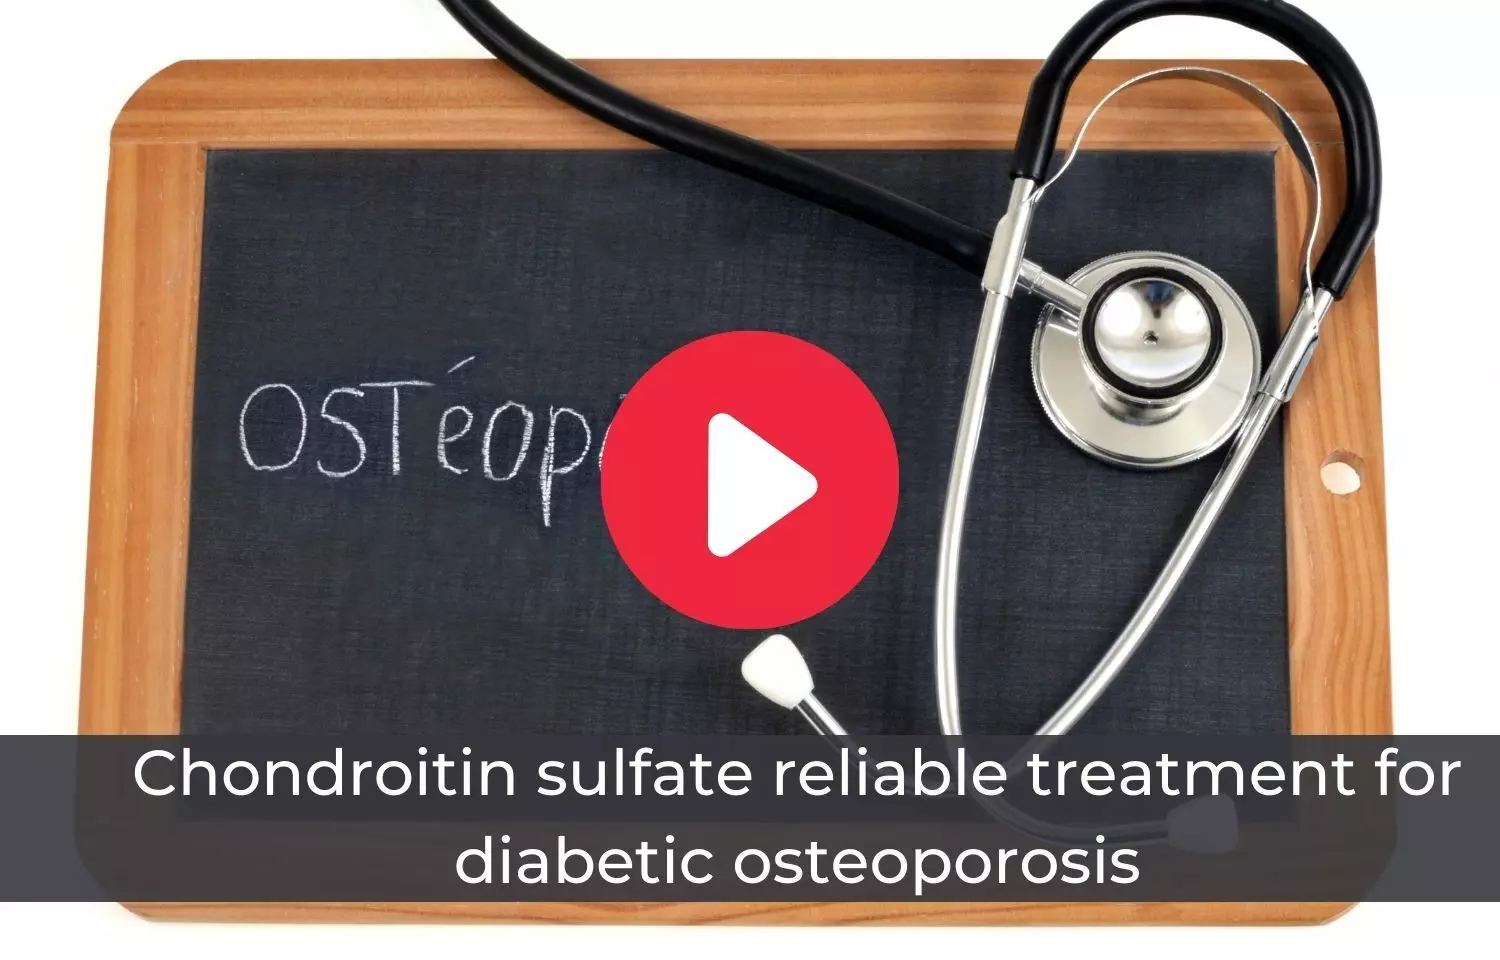 Chondroitin sulfate reliable treatment option for diabetic osteoporosis patients